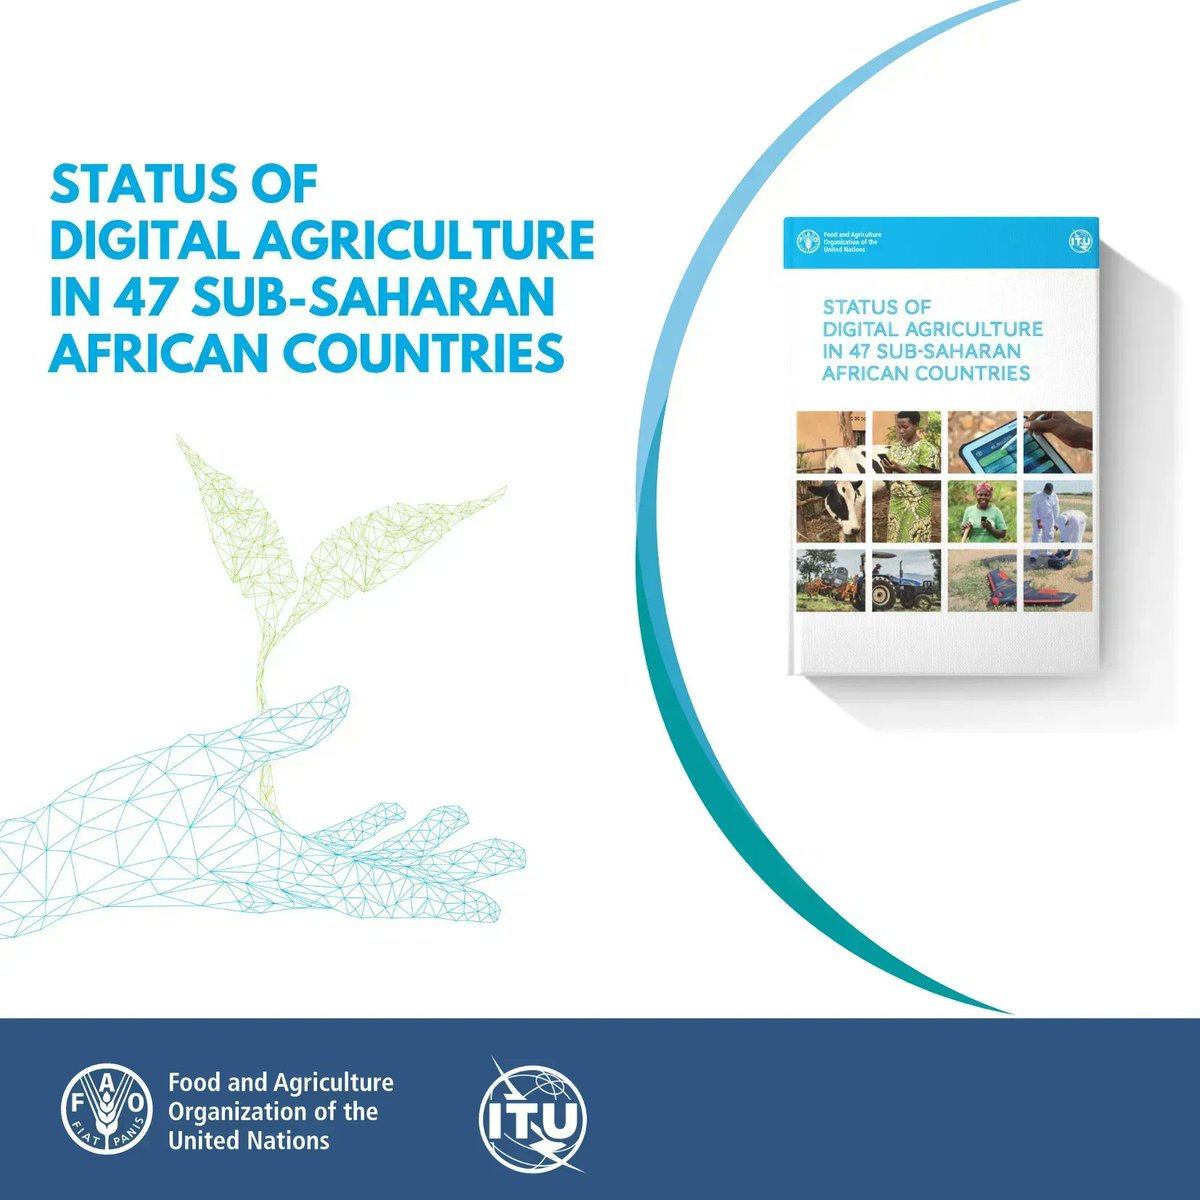 The aim of the Status of Digital Agriculture in 47 sub-Saharan African countries report is to present a snapshot of the status of digital agriculture in each of these countries. 

Read more 👉  bit.ly/3NsKA3i

#ICT4Ag 
#AgInnovation